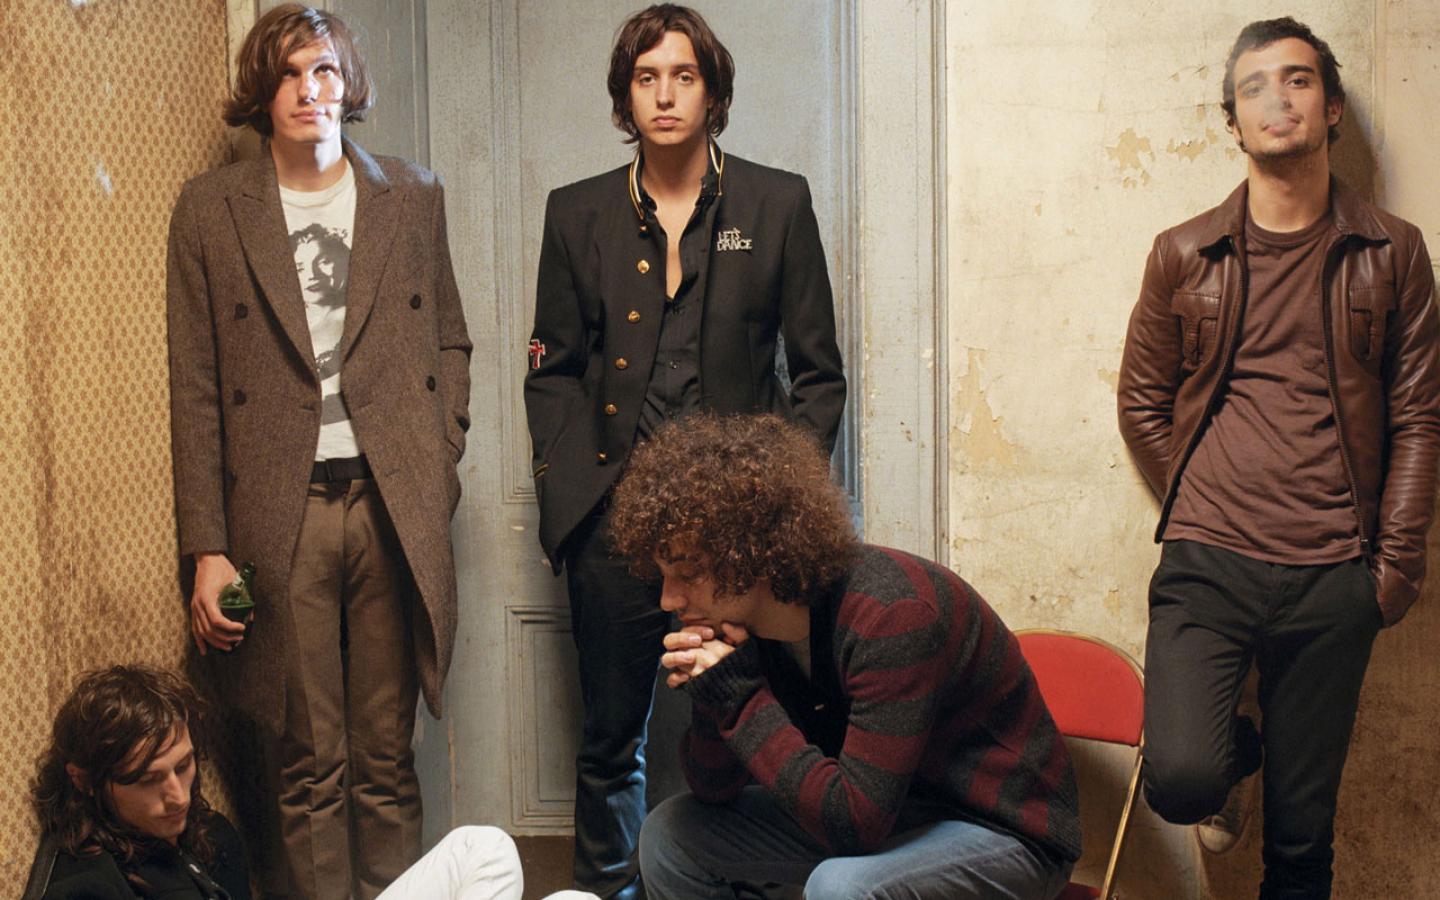 Best band - The Strokes 1440x900 Wallpaper #2